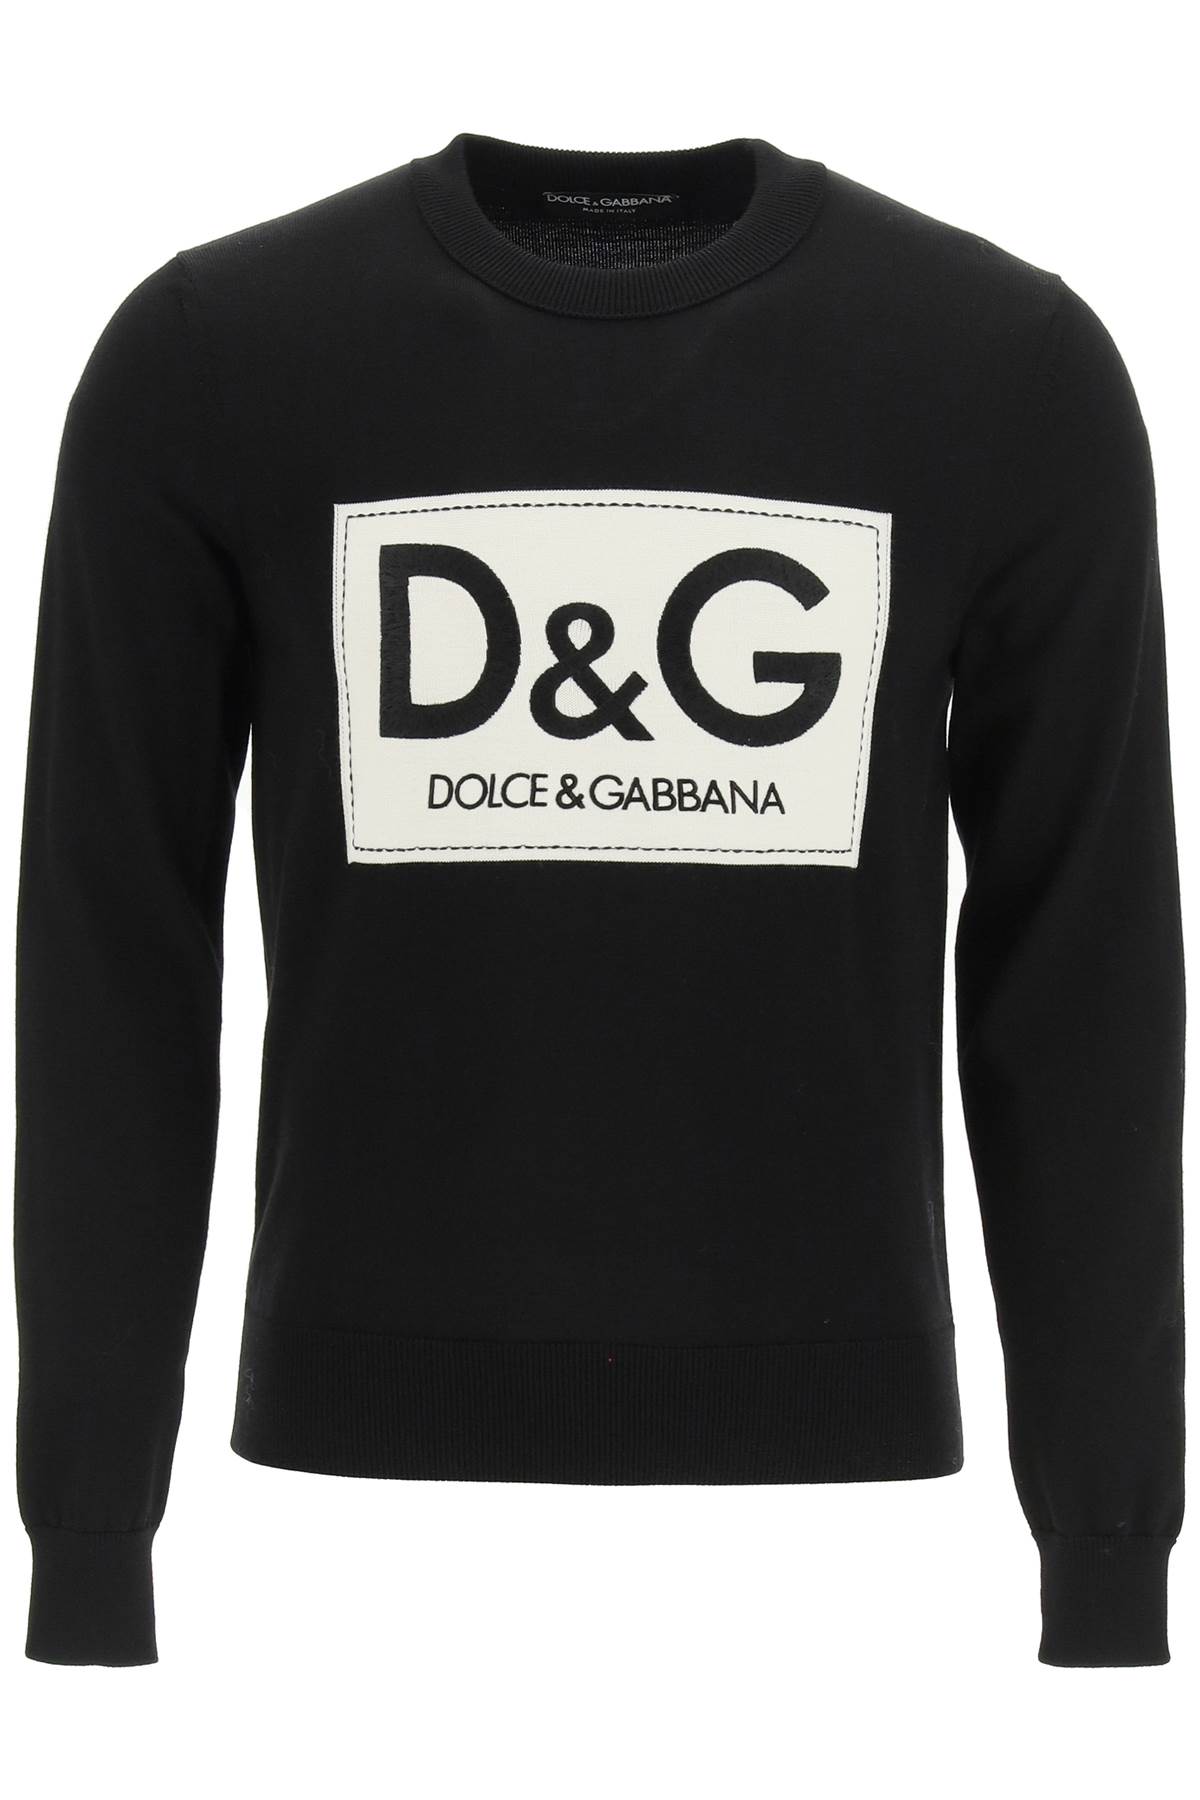 Dolce & Gabbana Wool Sweater With D & g Monogram Embroidery